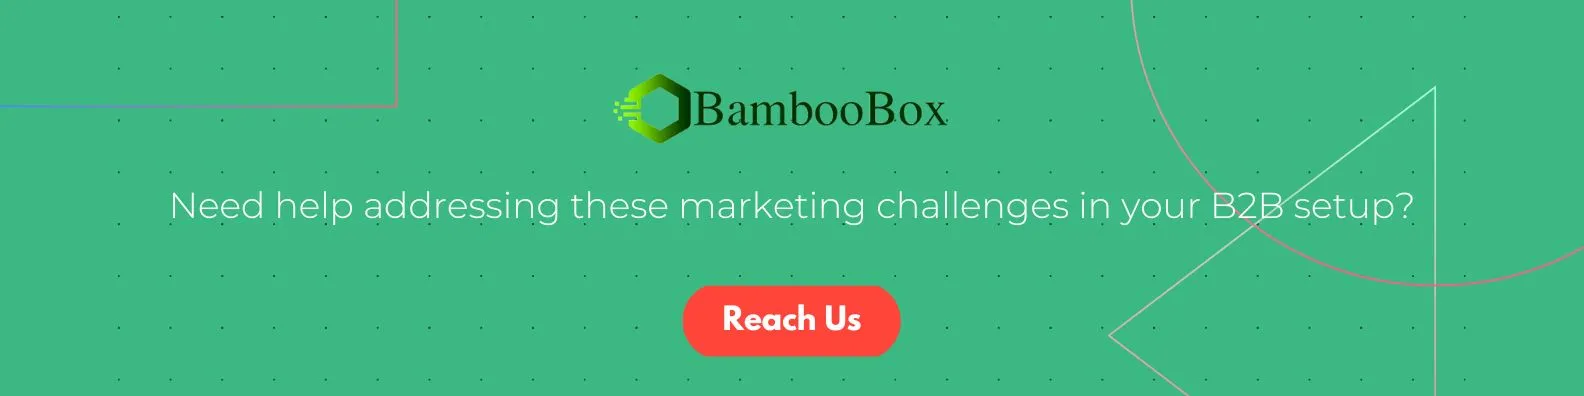 Need help addressing these marketing challenges in your B2B setup?